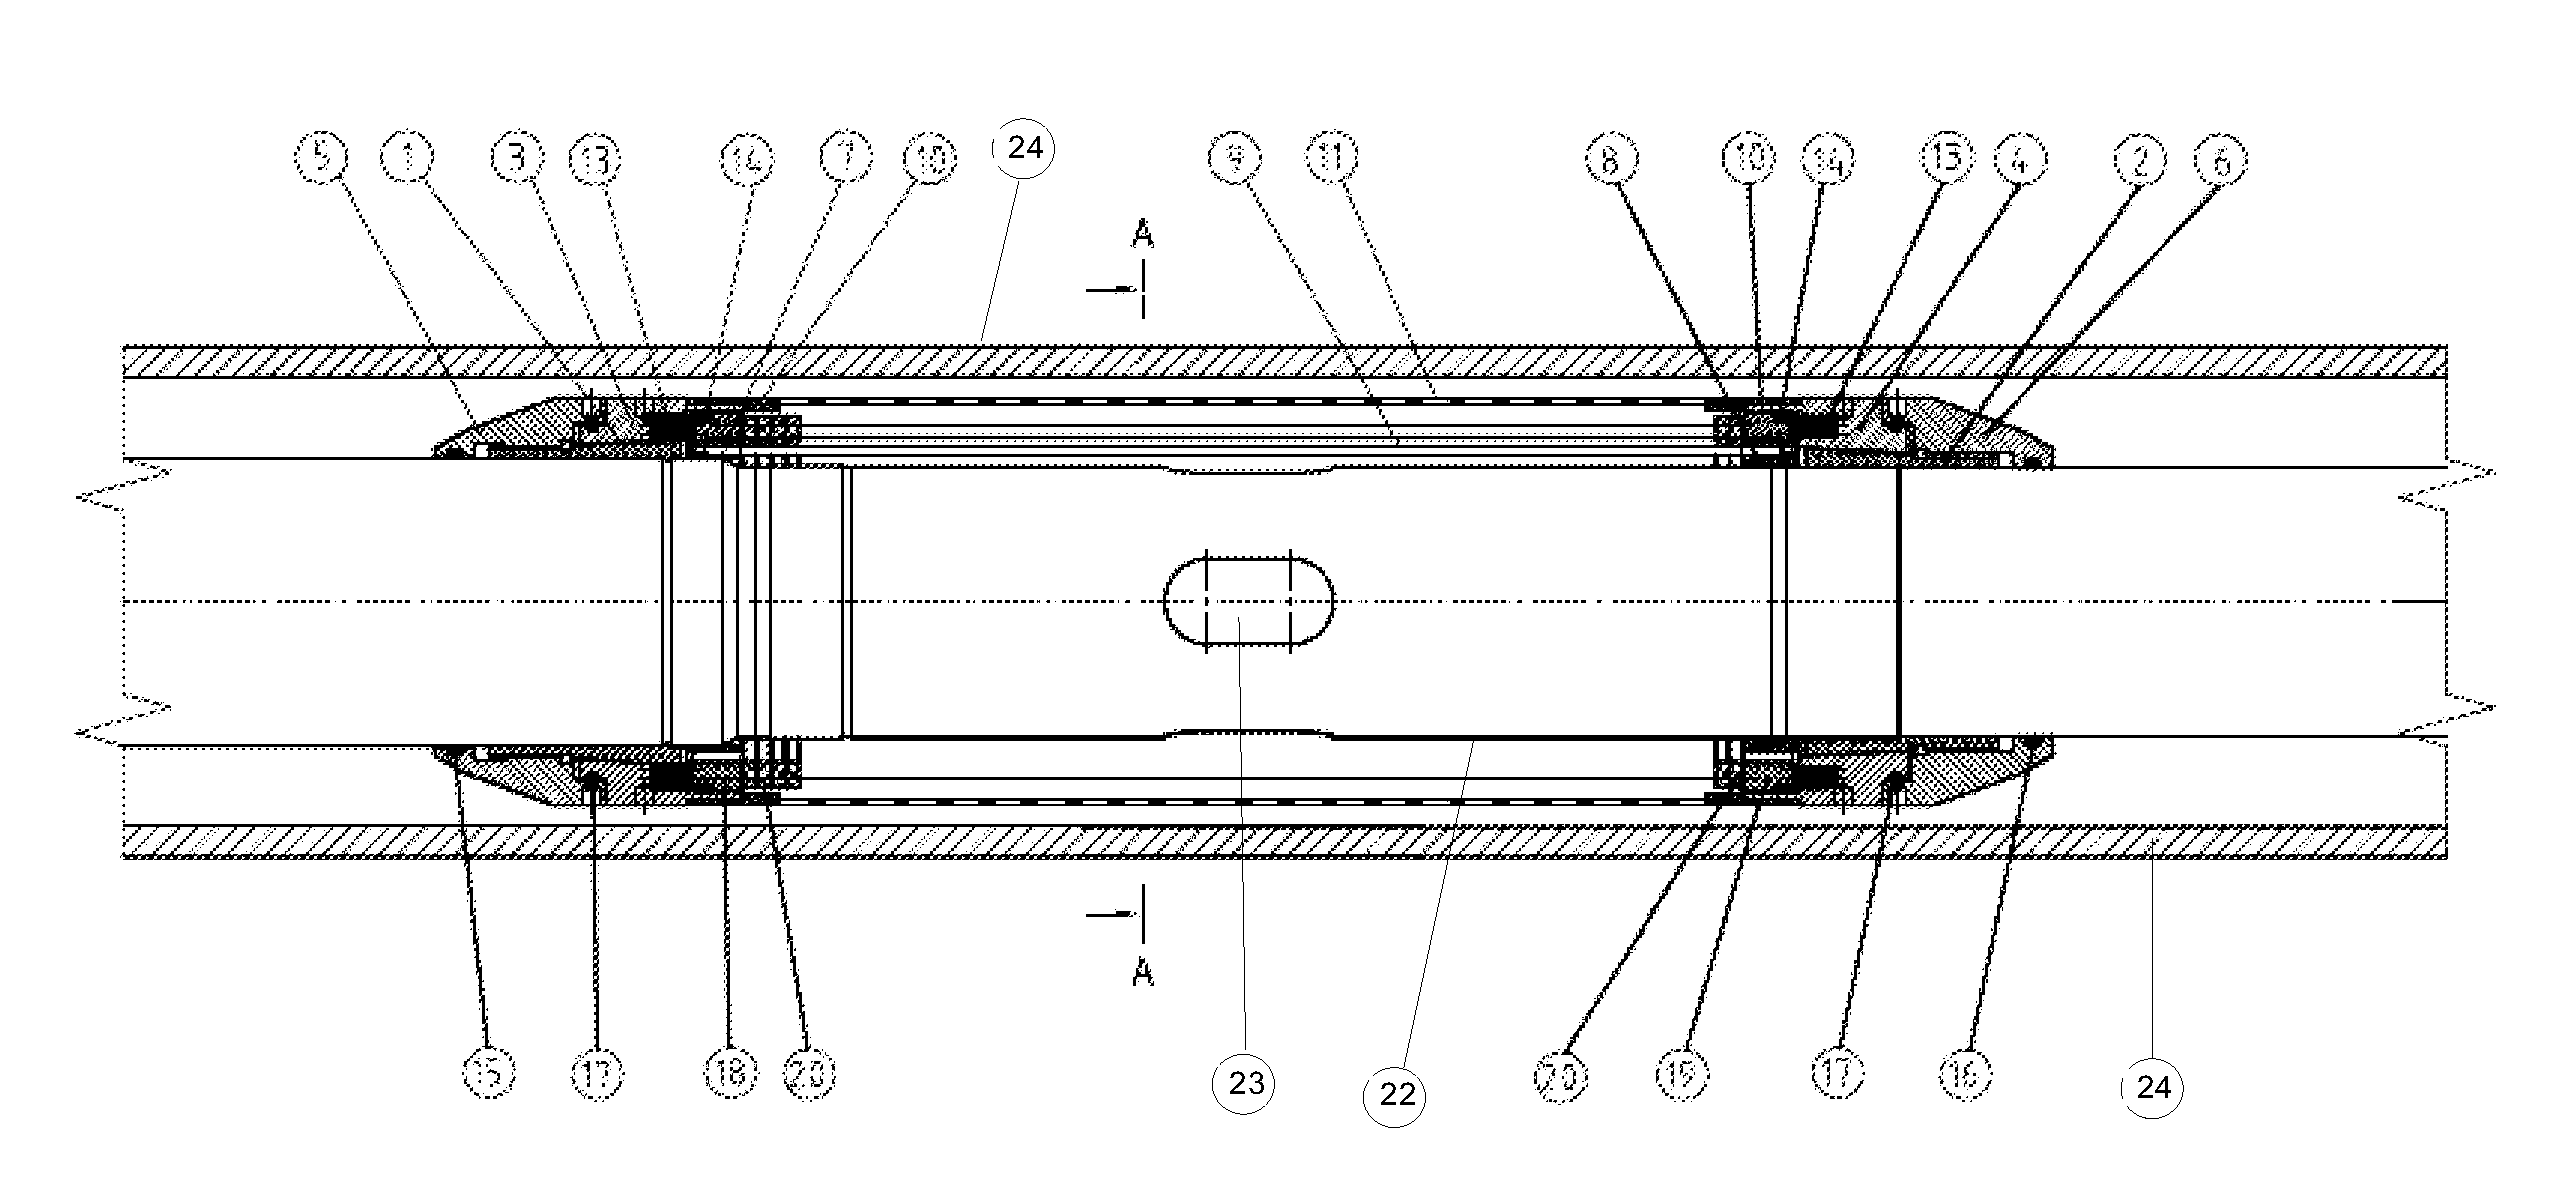 Separating device for tubular flow-through devices